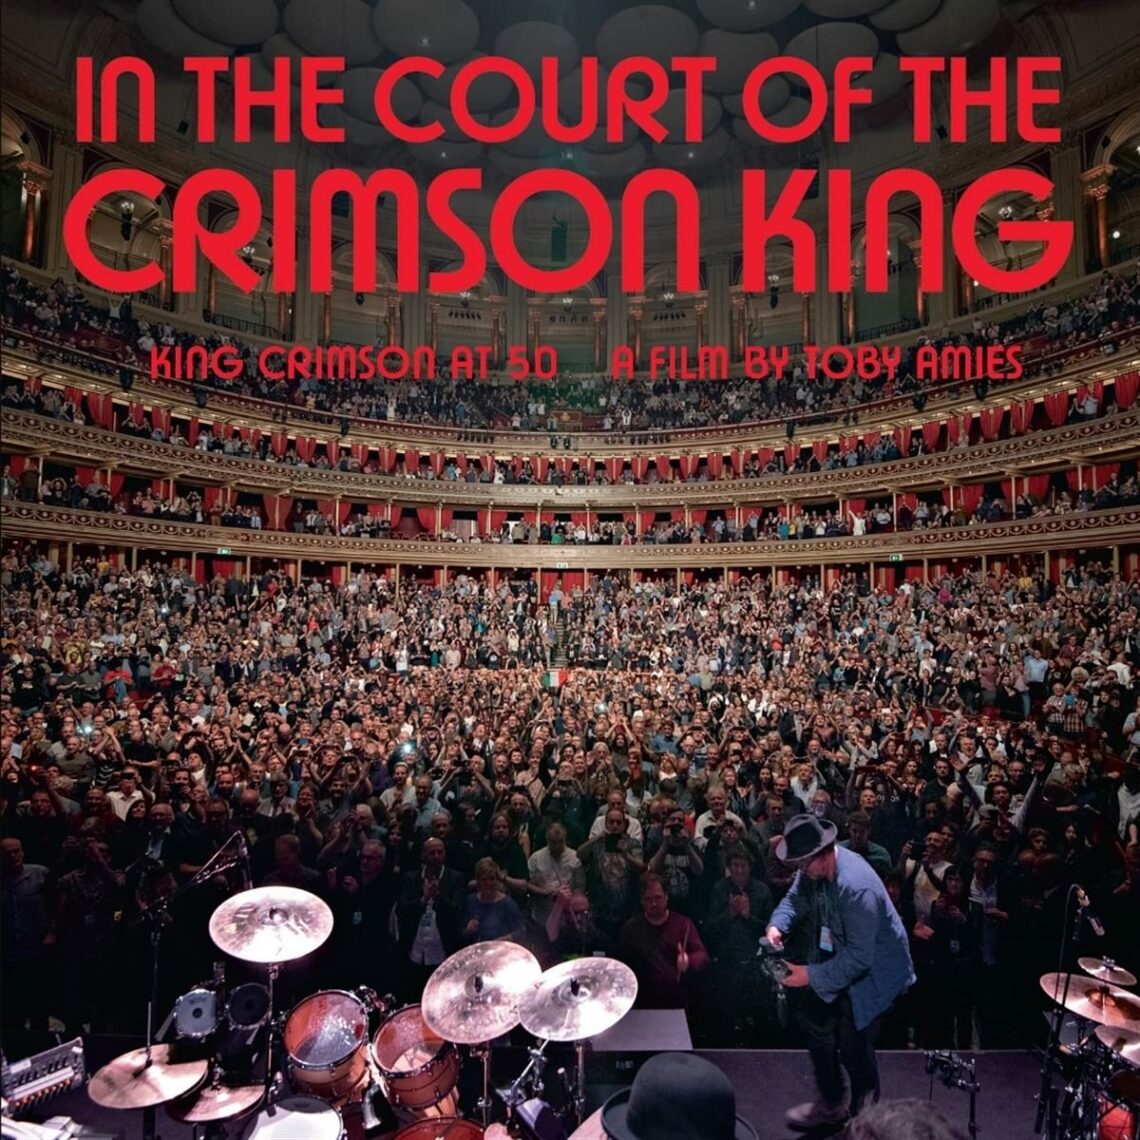 In the Court of the Crimson King - King Crimson at 50